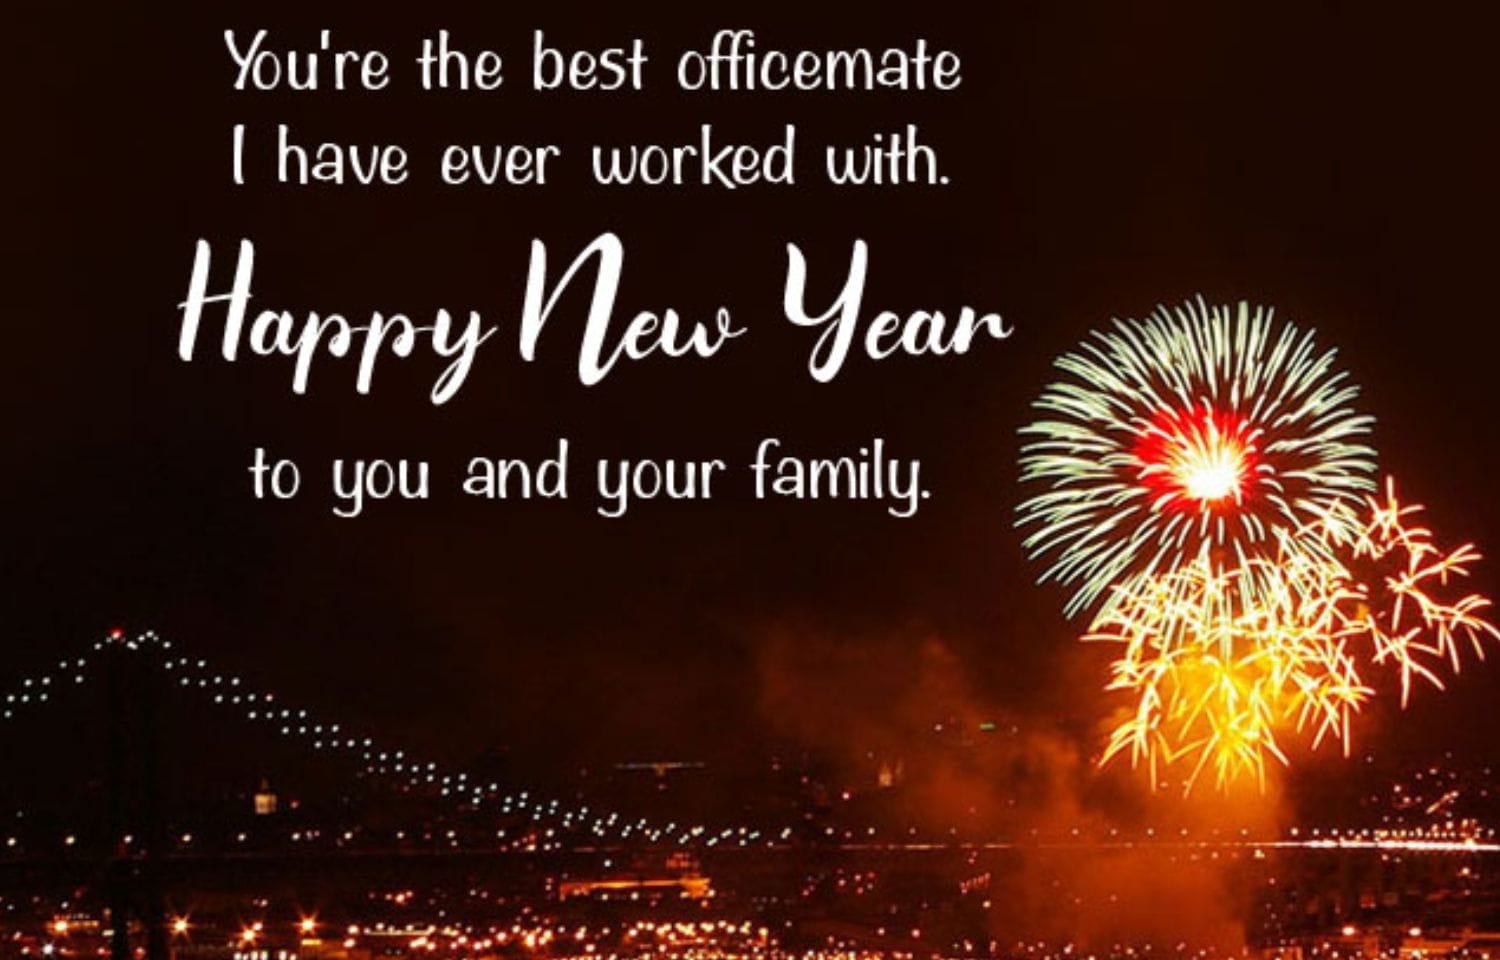 Happy New Year Wishes For Coworkers Here's What You Are Looking For